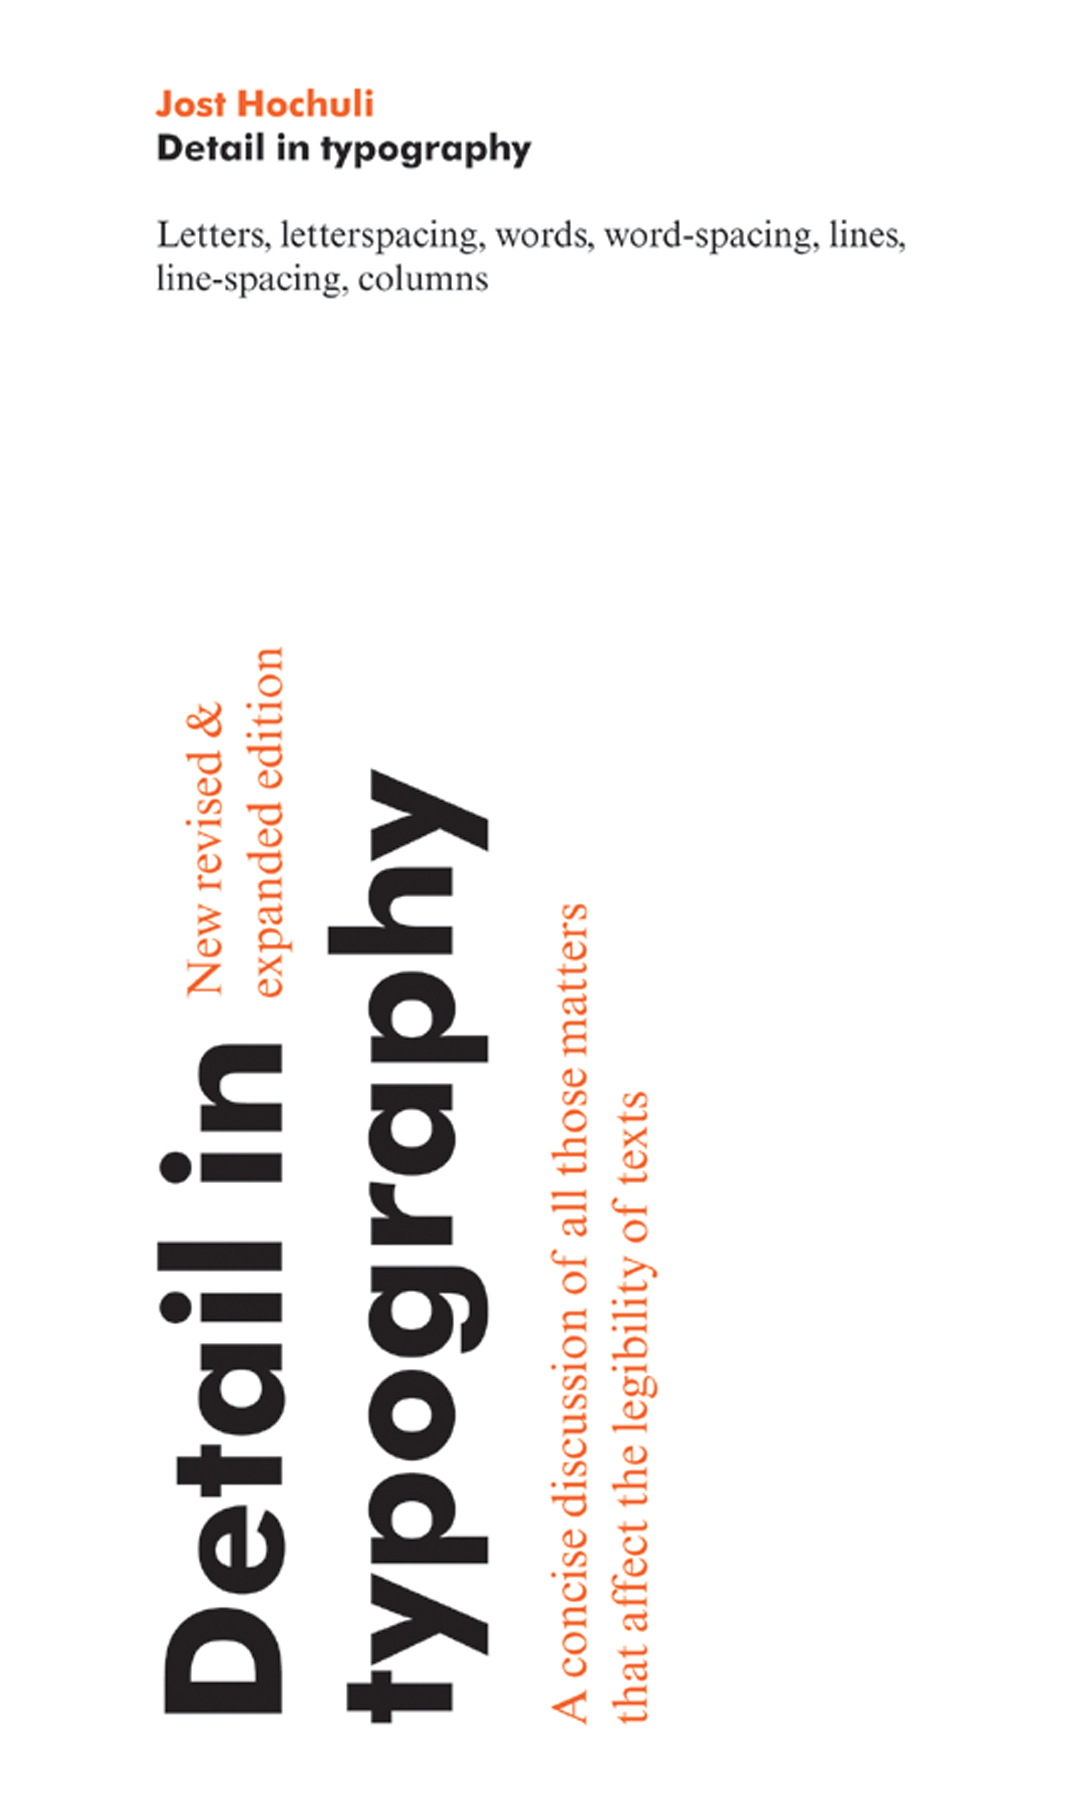 ‘Detail in typography’ out of print